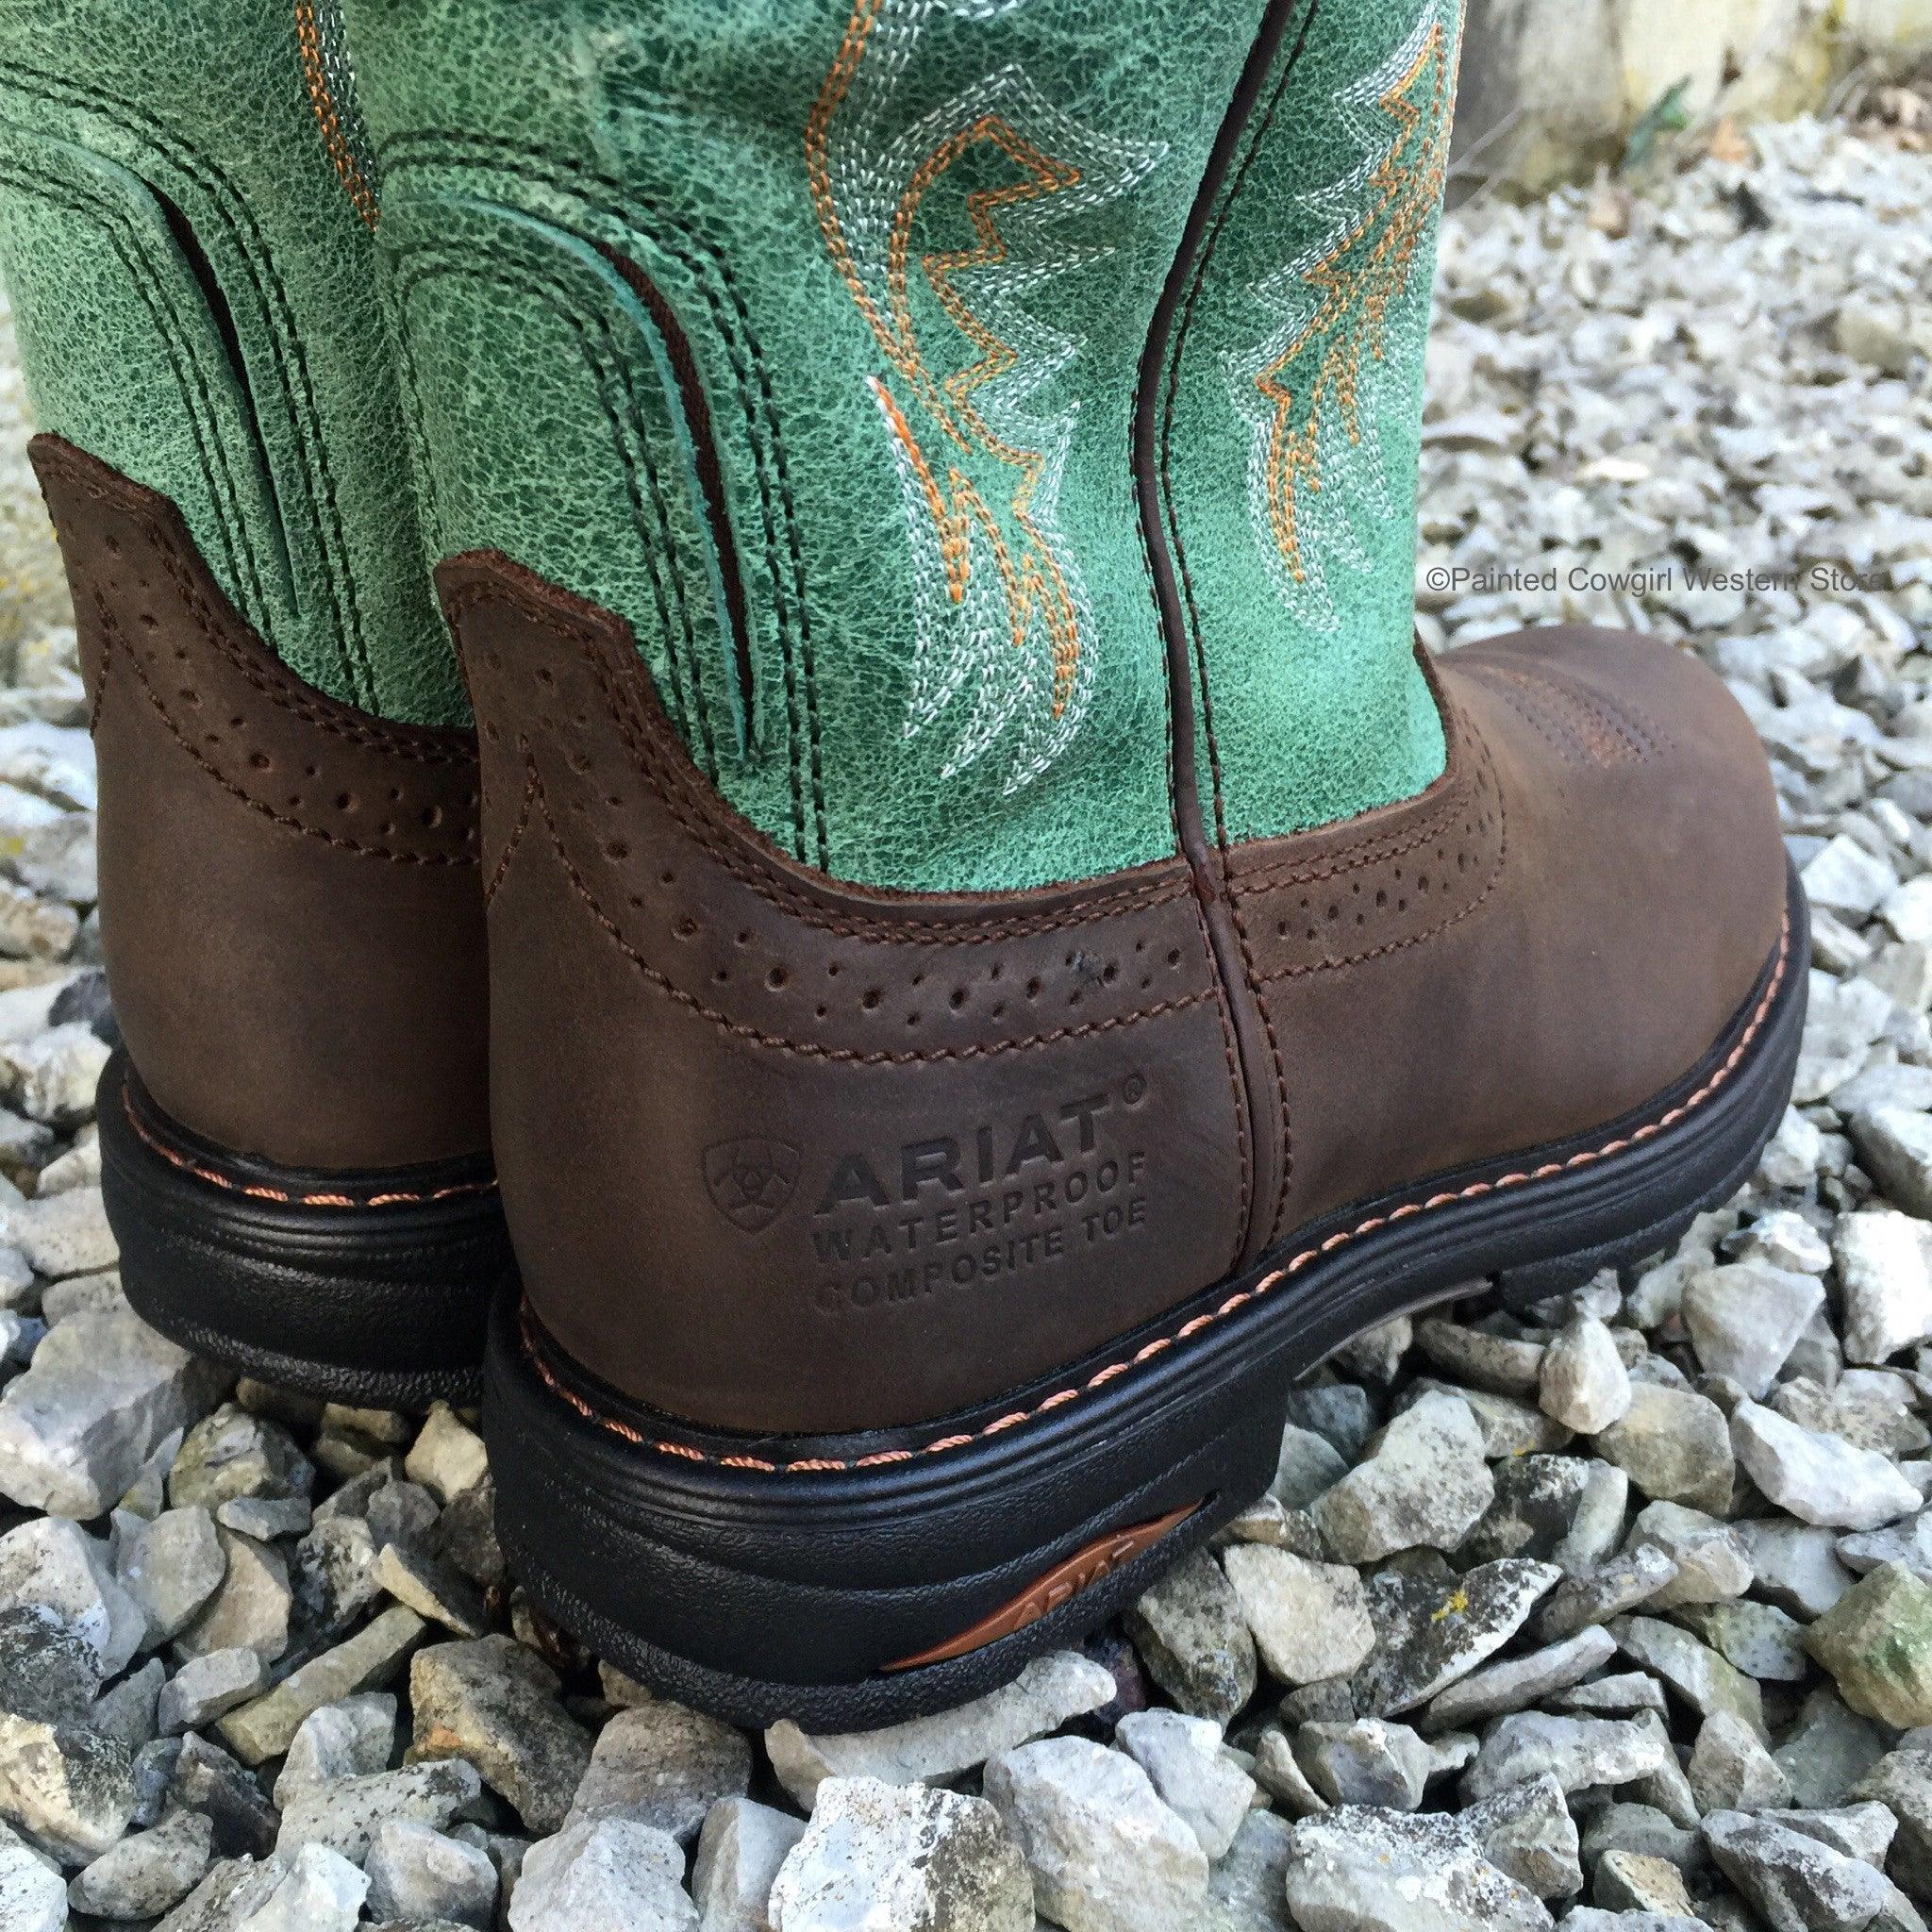 tracey composite toe work boot